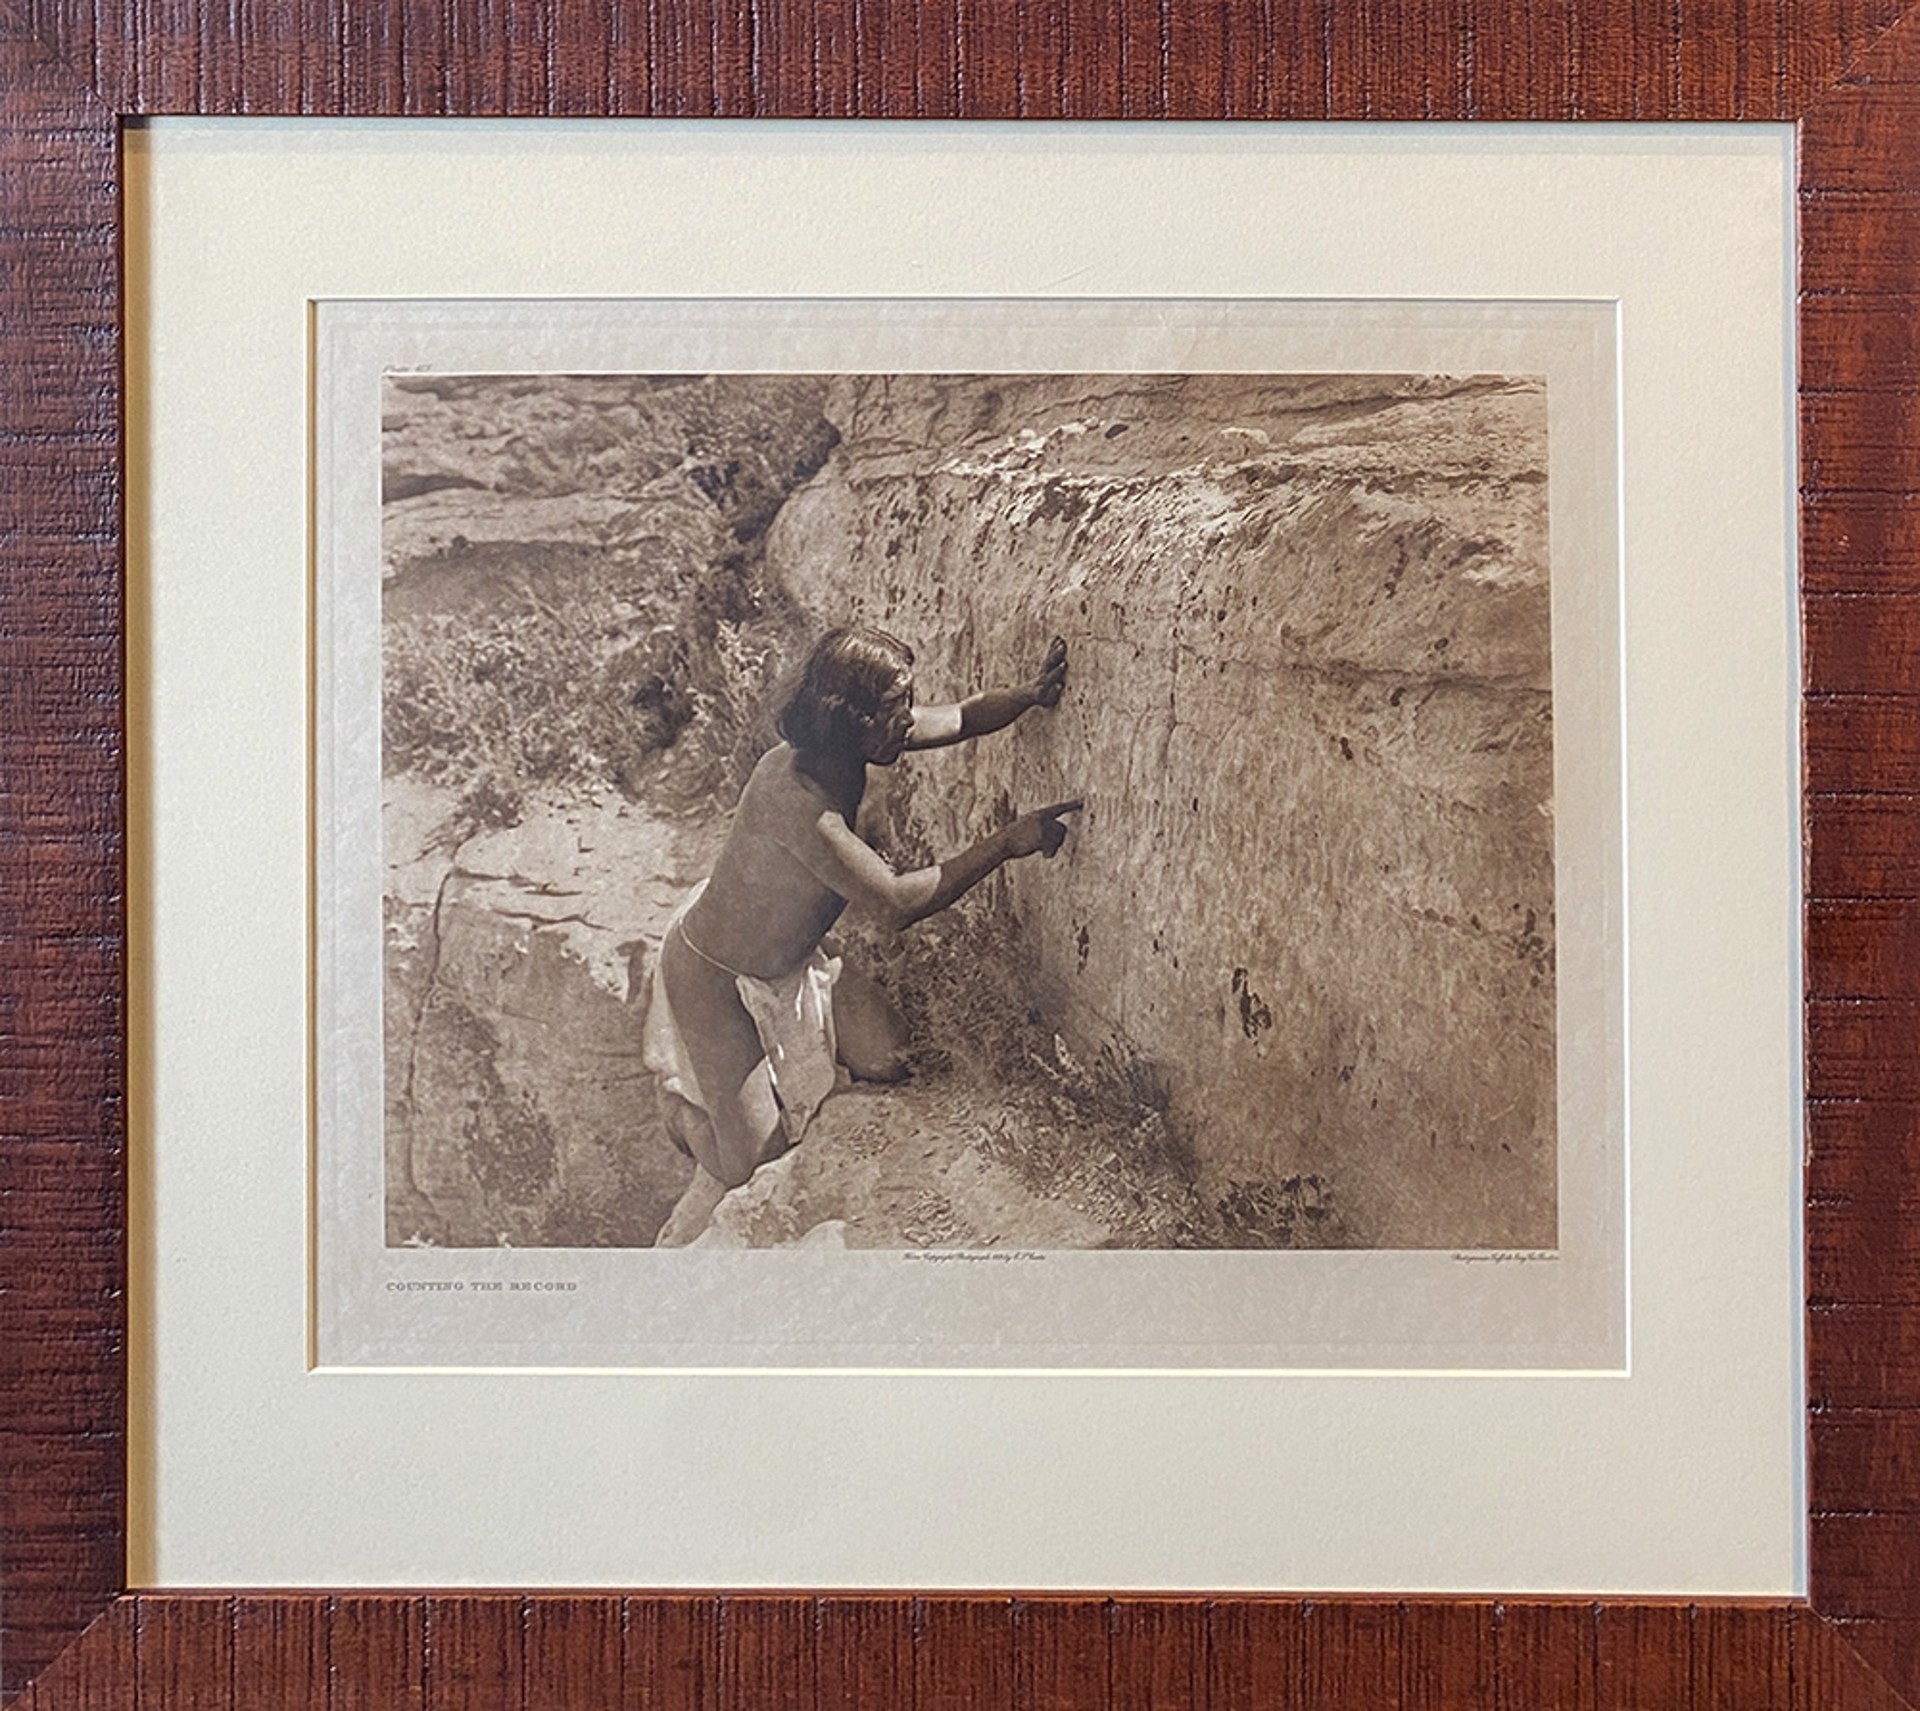 Counting the Record, plate #413 by Edward S Curtis